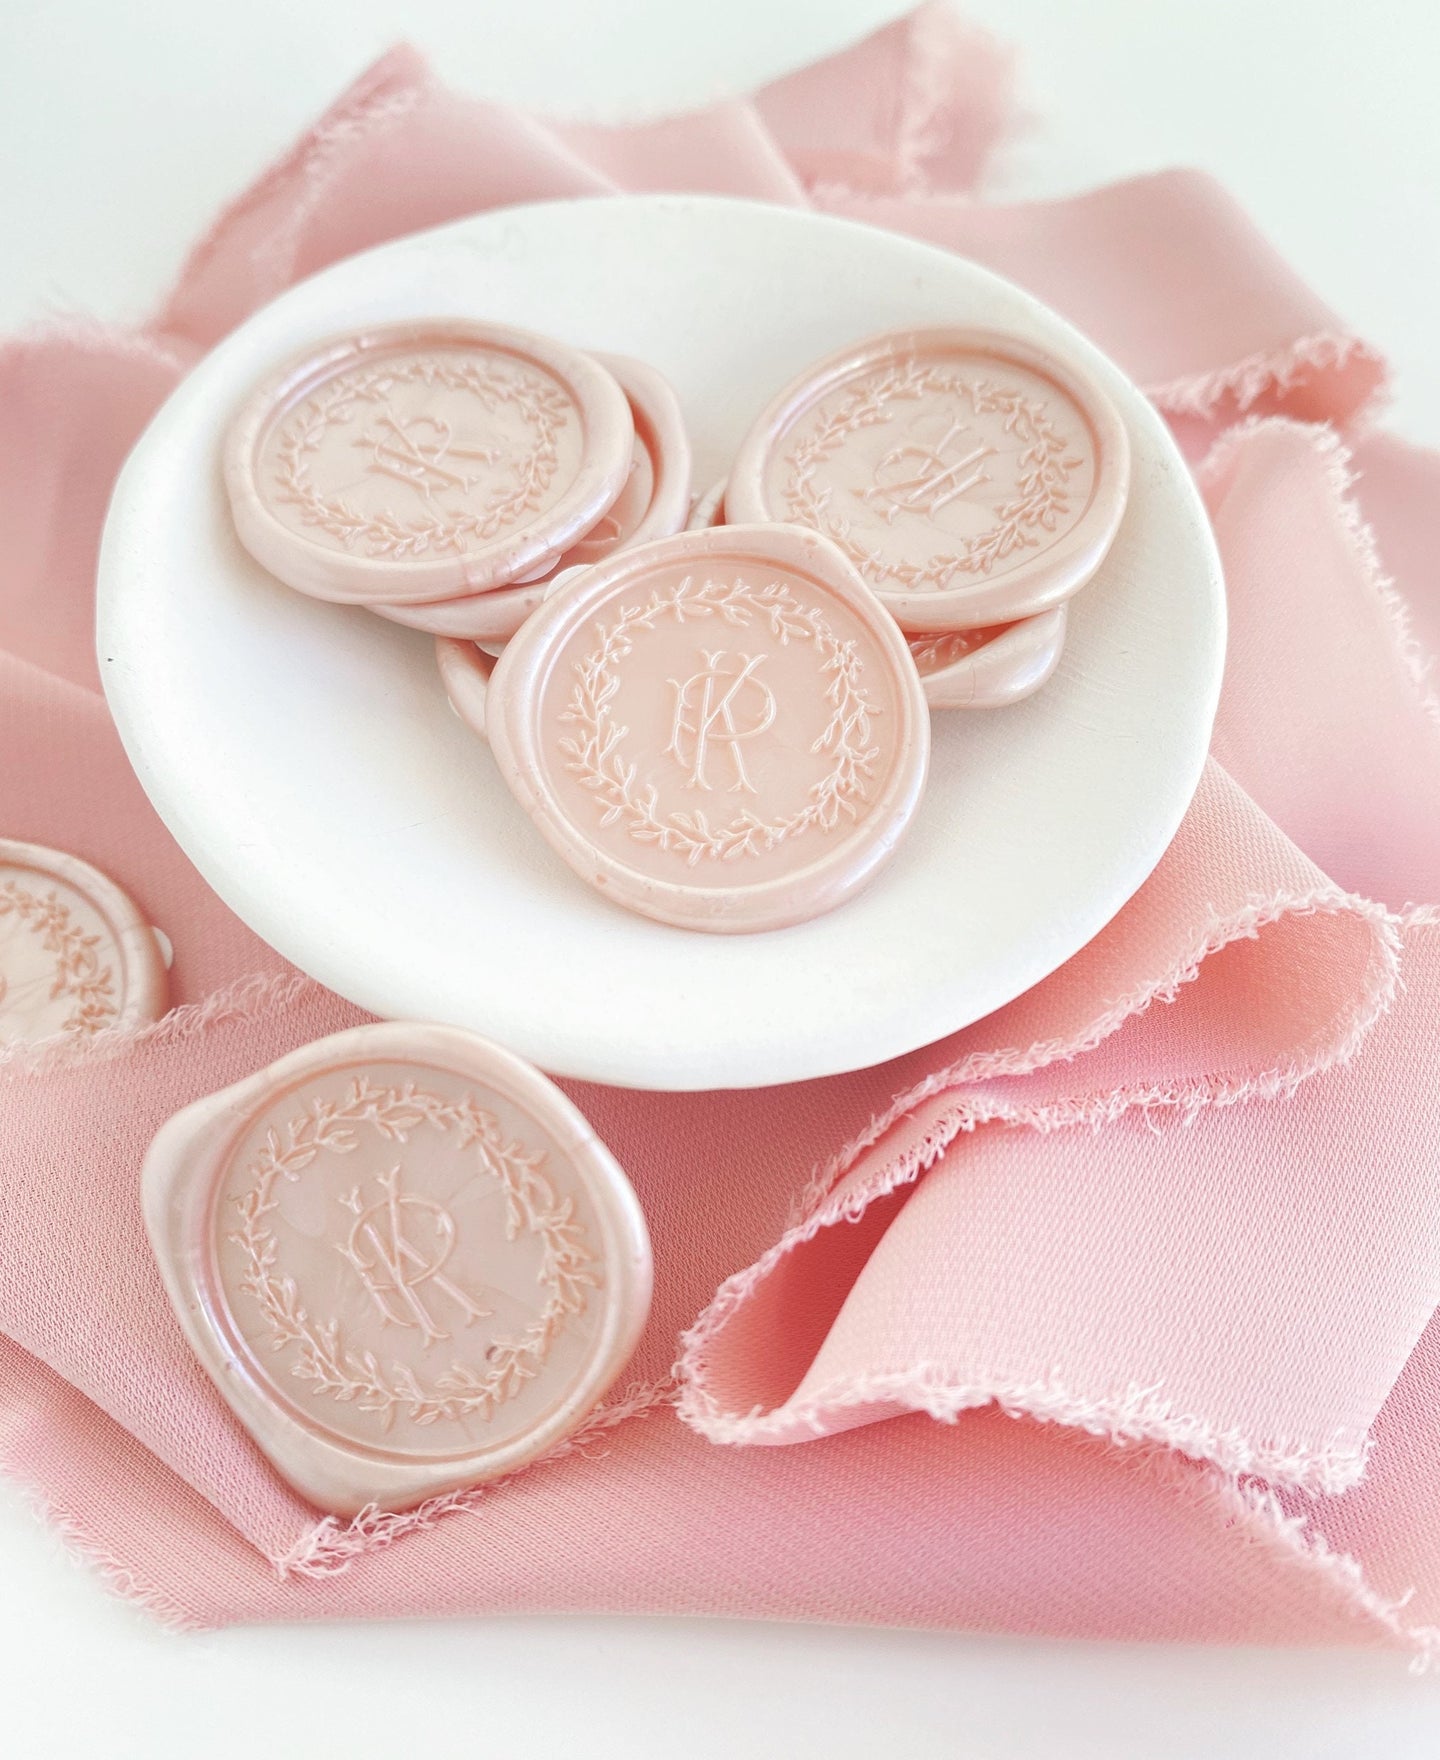 Personalized Wax Seals